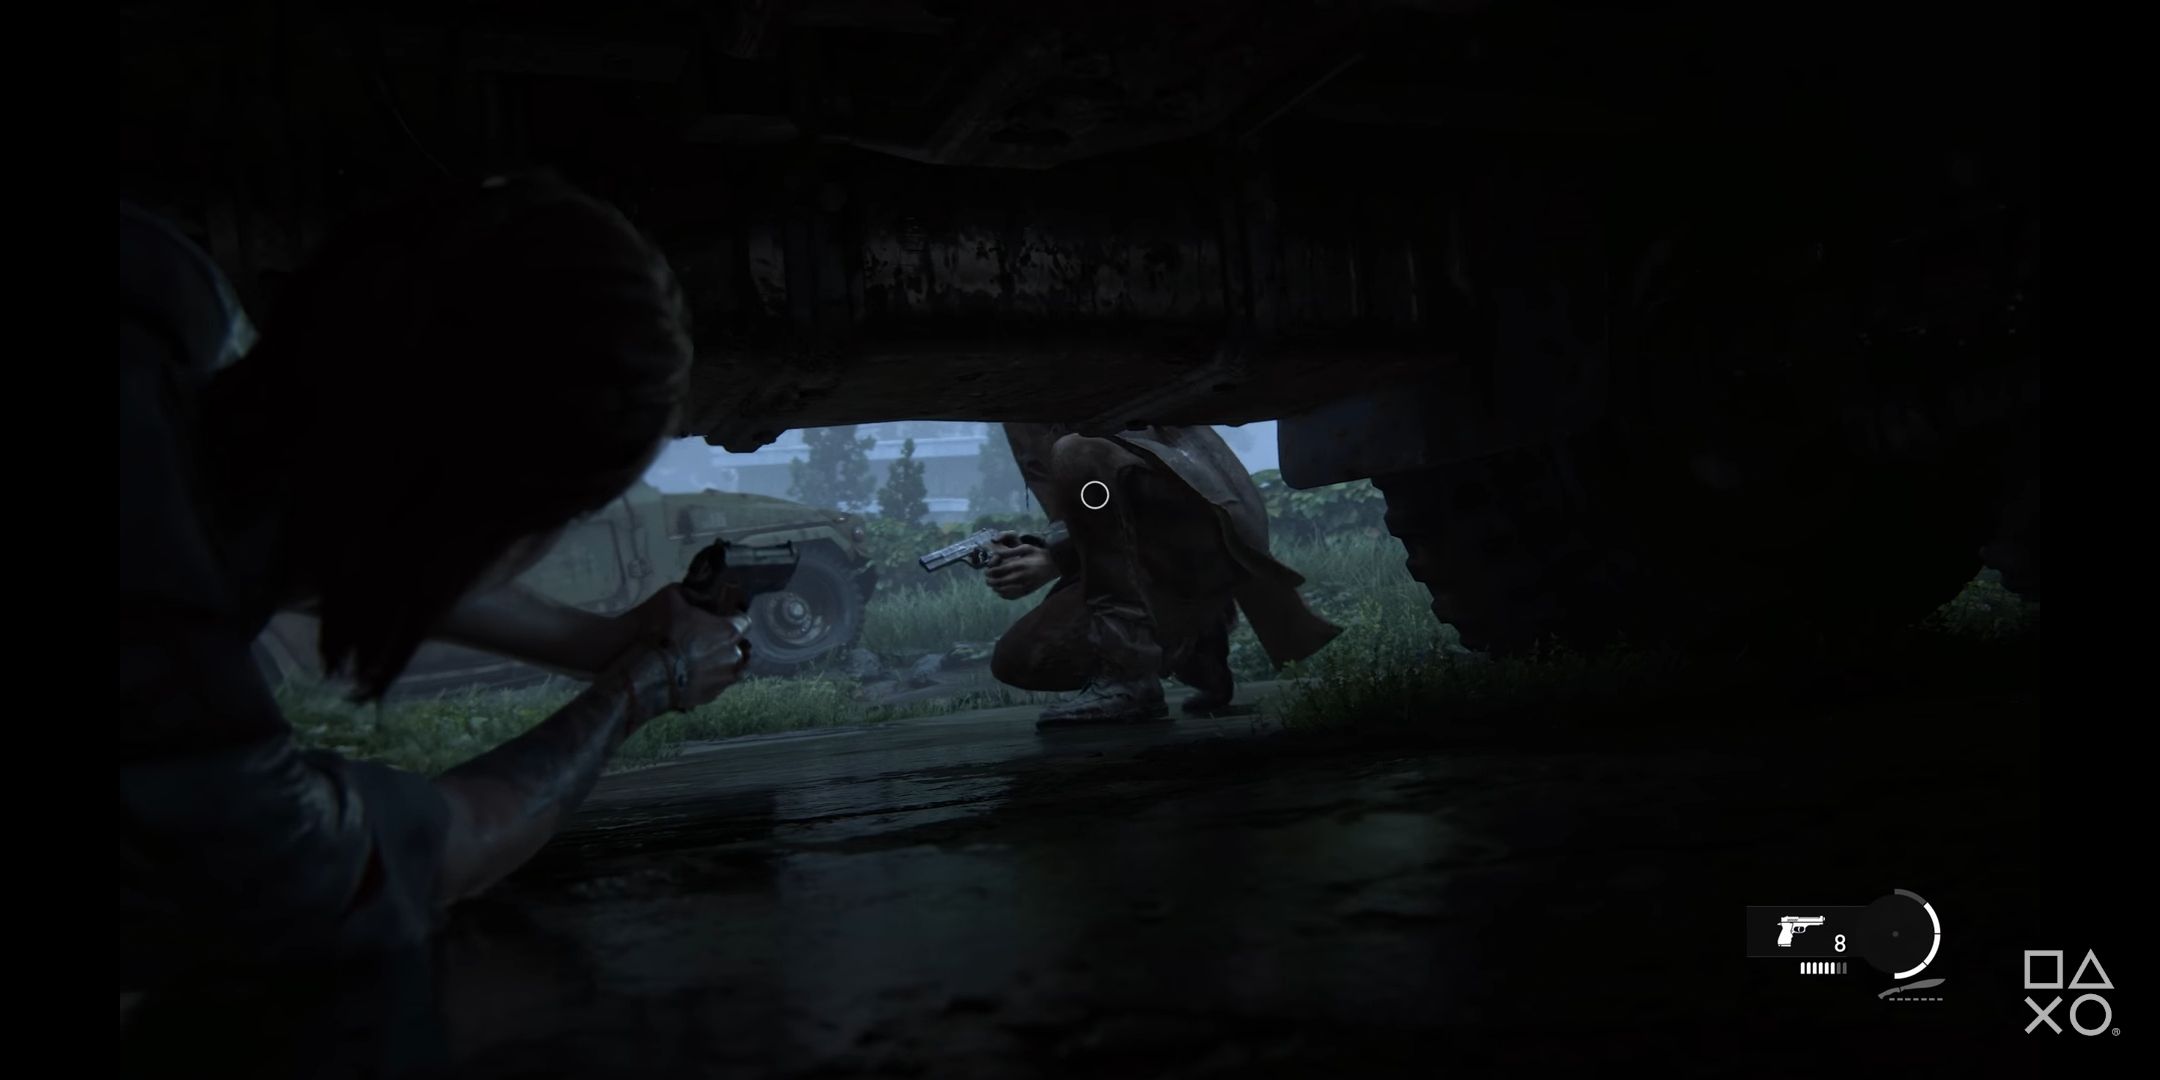 Ellie stealth hiding under truck in the last of us 2 tlou2 gameplay trailer/demo